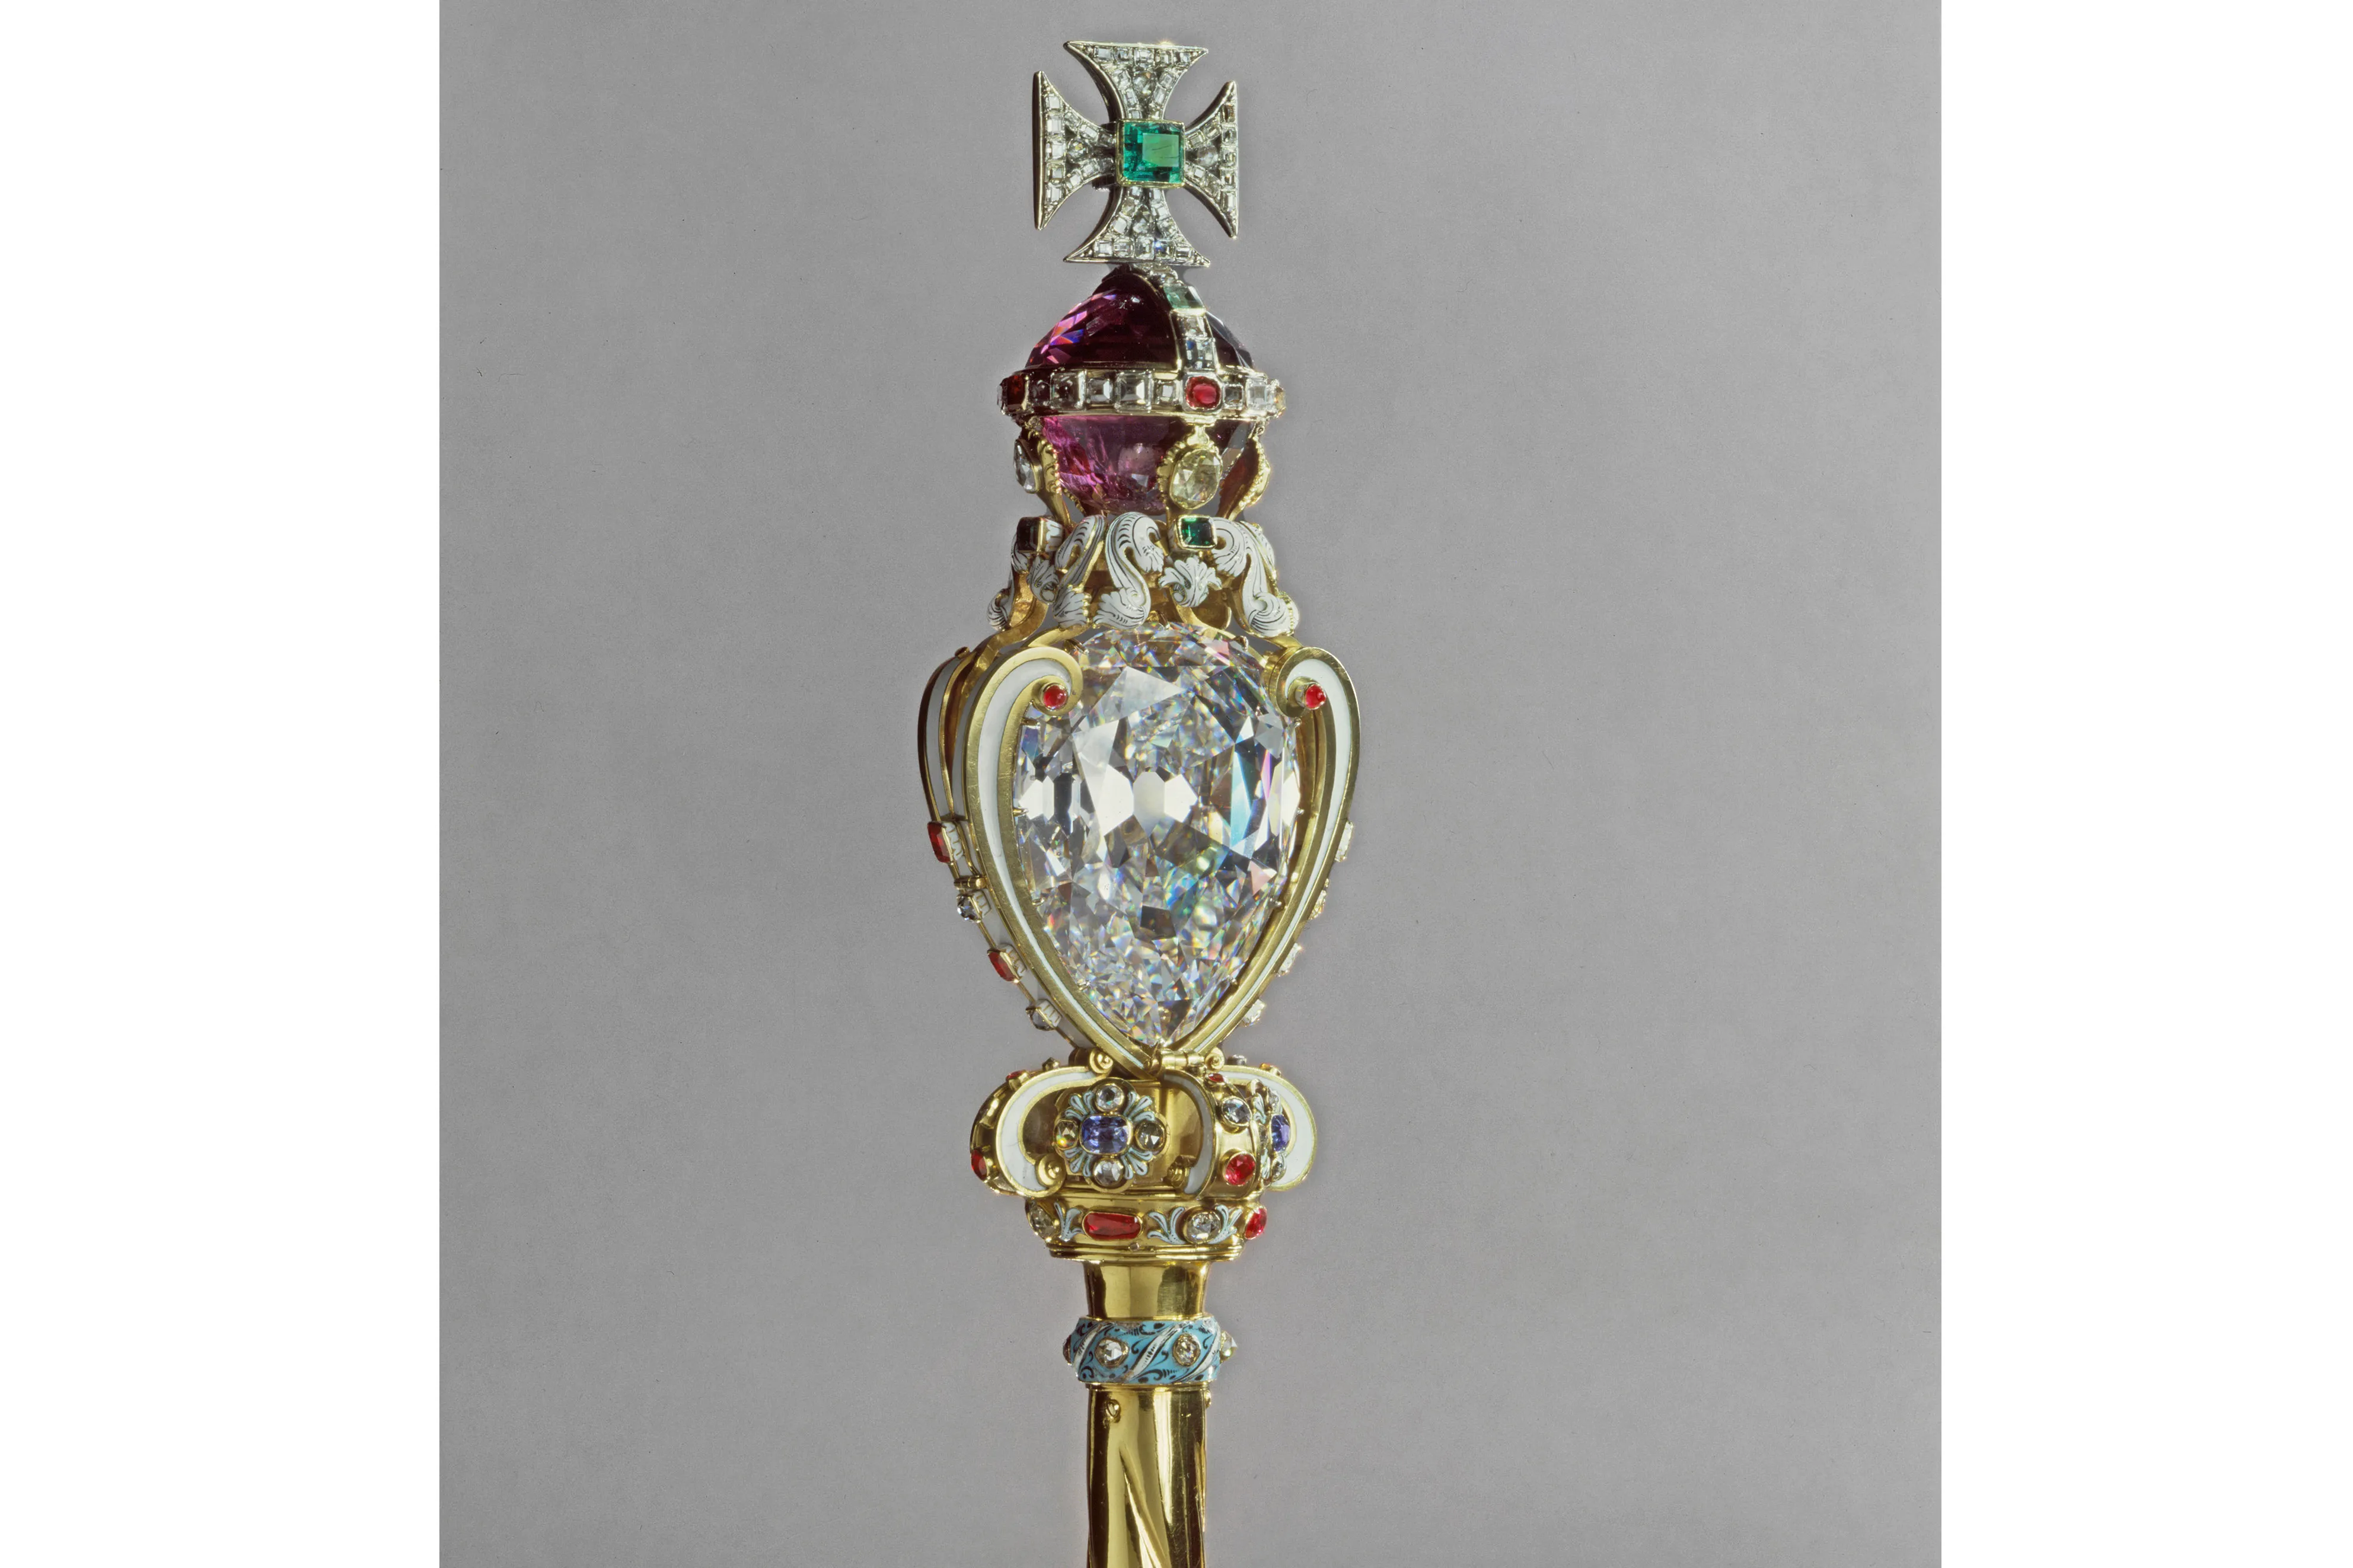 Sovereign’s Scepter with Cross. Royal Collection Trust / © His Majesty King Charles III 2023